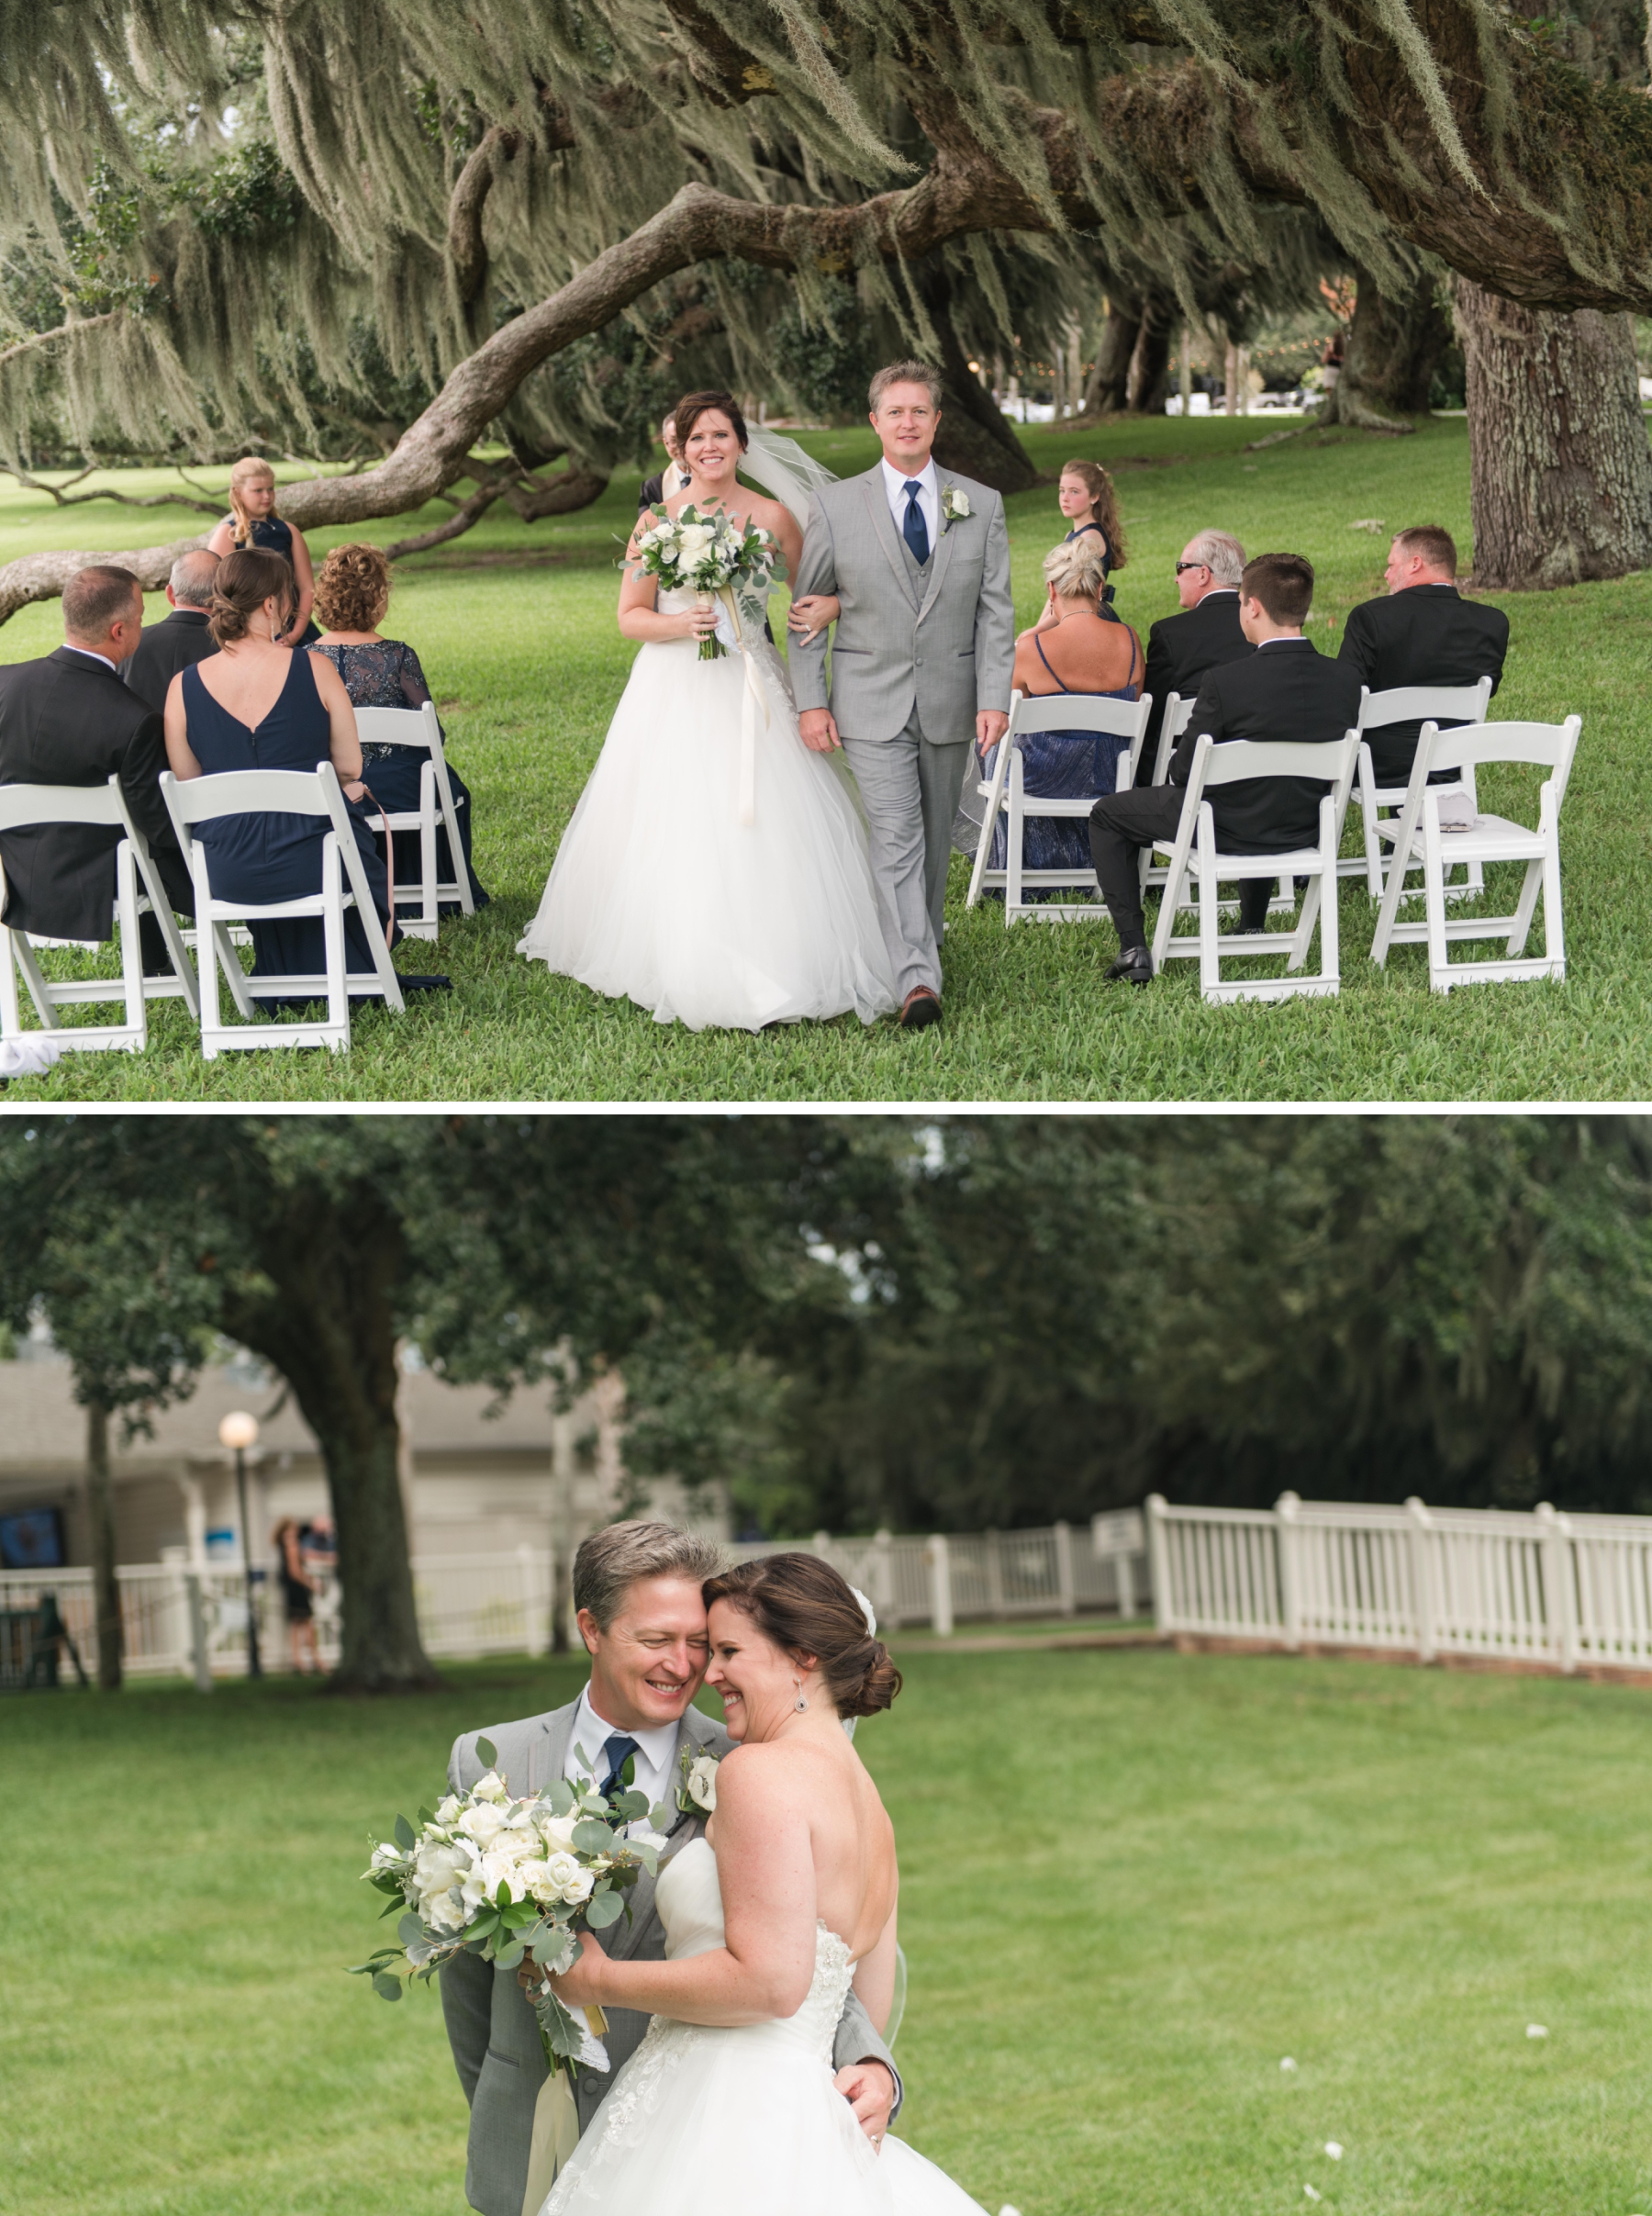 A micro wedding with planning by Swanson Signature Events